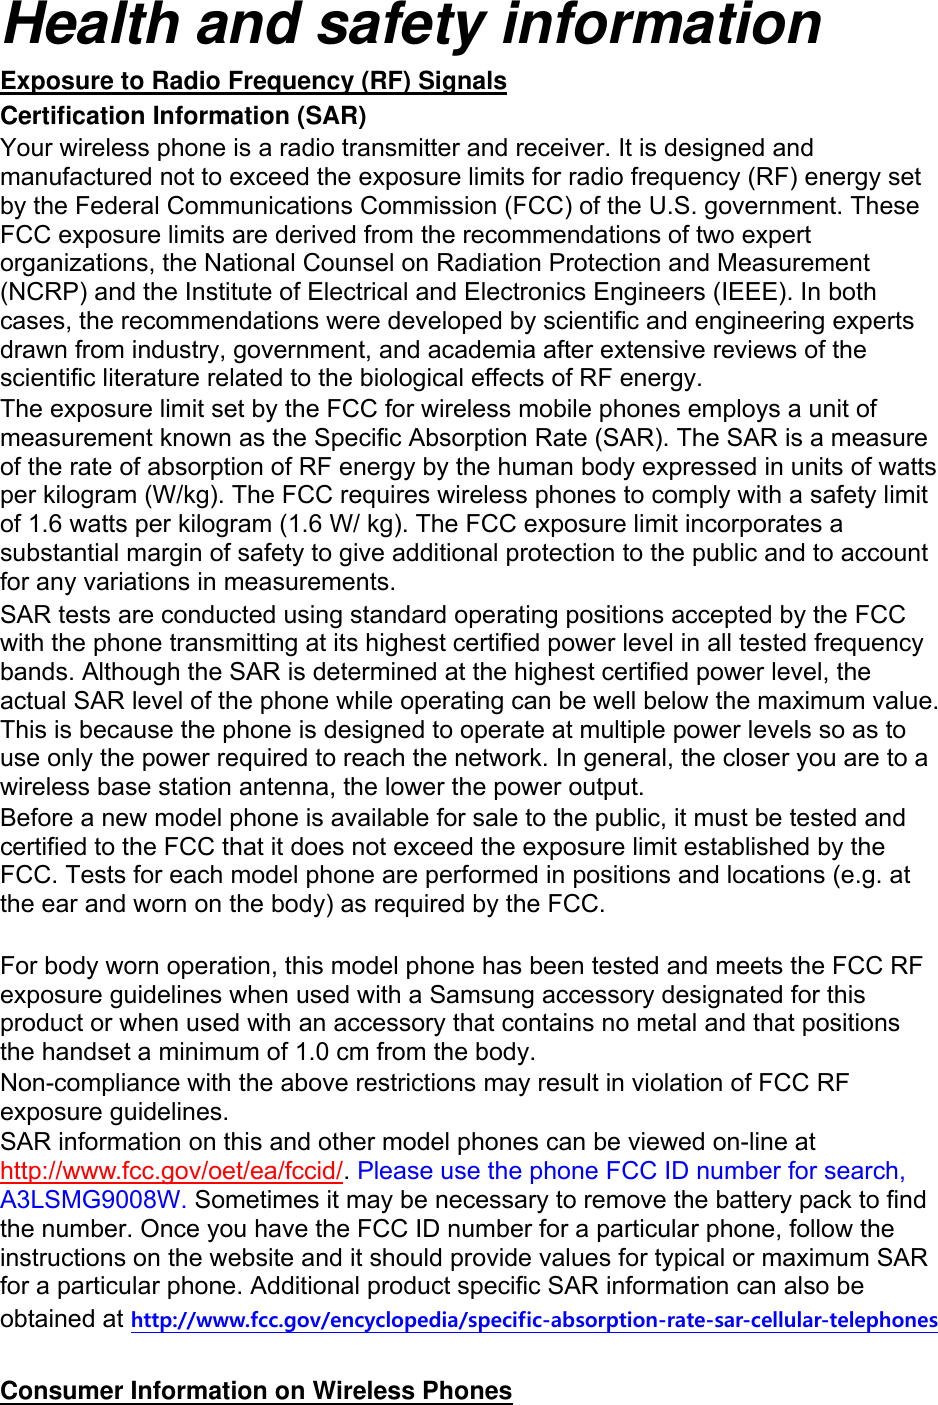 Health and safety information Exposure to Radio Frequency (RF) Signals Certification Information (SAR) Your wireless phone is a radio transmitter and receiver. It is designed and manufactured not to exceed the exposure limits for radio frequency (RF) energy set by the Federal Communications Commission (FCC) of the U.S. government. These FCC exposure limits are derived from the recommendations of two expert organizations, the National Counsel on Radiation Protection and Measurement (NCRP) and the Institute of Electrical and Electronics Engineers (IEEE). In both cases, the recommendations were developed by scientific and engineering experts drawn from industry, government, and academia after extensive reviews of the scientific literature related to the biological effects of RF energy. The exposure limit set by the FCC for wireless mobile phones employs a unit of measurement known as the Specific Absorption Rate (SAR). The SAR is a measure of the rate of absorption of RF energy by the human body expressed in units of watts per kilogram (W/kg). The FCC requires wireless phones to comply with a safety limit of 1.6 watts per kilogram (1.6 W/ kg). The FCC exposure limit incorporates a substantial margin of safety to give additional protection to the public and to account for any variations in measurements. SAR tests are conducted using standard operating positions accepted by the FCC with the phone transmitting at its highest certified power level in all tested frequency bands. Although the SAR is determined at the highest certified power level, the actual SAR level of the phone while operating can be well below the maximum value. This is because the phone is designed to operate at multiple power levels so as to use only the power required to reach the network. In general, the closer you are to a wireless base station antenna, the lower the power output. Before a new model phone is available for sale to the public, it must be tested and certified to the FCC that it does not exceed the exposure limit established by the FCC. Tests for each model phone are performed in positions and locations (e.g. at the ear and worn on the body) as required by the FCC.      For body worn operation, this model phone has been tested and meets the FCC RF exposure guidelines when used with a Samsung accessory designated for this product or when used with an accessory that contains no metal and that positions the handset a minimum of 1.0 cm from the body.   Non-compliance with the above restrictions may result in violation of FCC RF exposure guidelines. SAR information on this and other model phones can be viewed on-line at http://www.fcc.gov/oet/ea/fccid/. Please use the phone FCC ID number for search, A3LSMG9008W. Sometimes it may be necessary to remove the battery pack to find the number. Once you have the FCC ID number for a particular phone, follow the instructions on the website and it should provide values for typical or maximum SAR for a particular phone. Additional product specific SAR information can also be obtained at http://www.fcc.gov/encyclopedia/specific-absorption-rate-sar-cellular-telephones  Consumer Information on Wireless Phones 